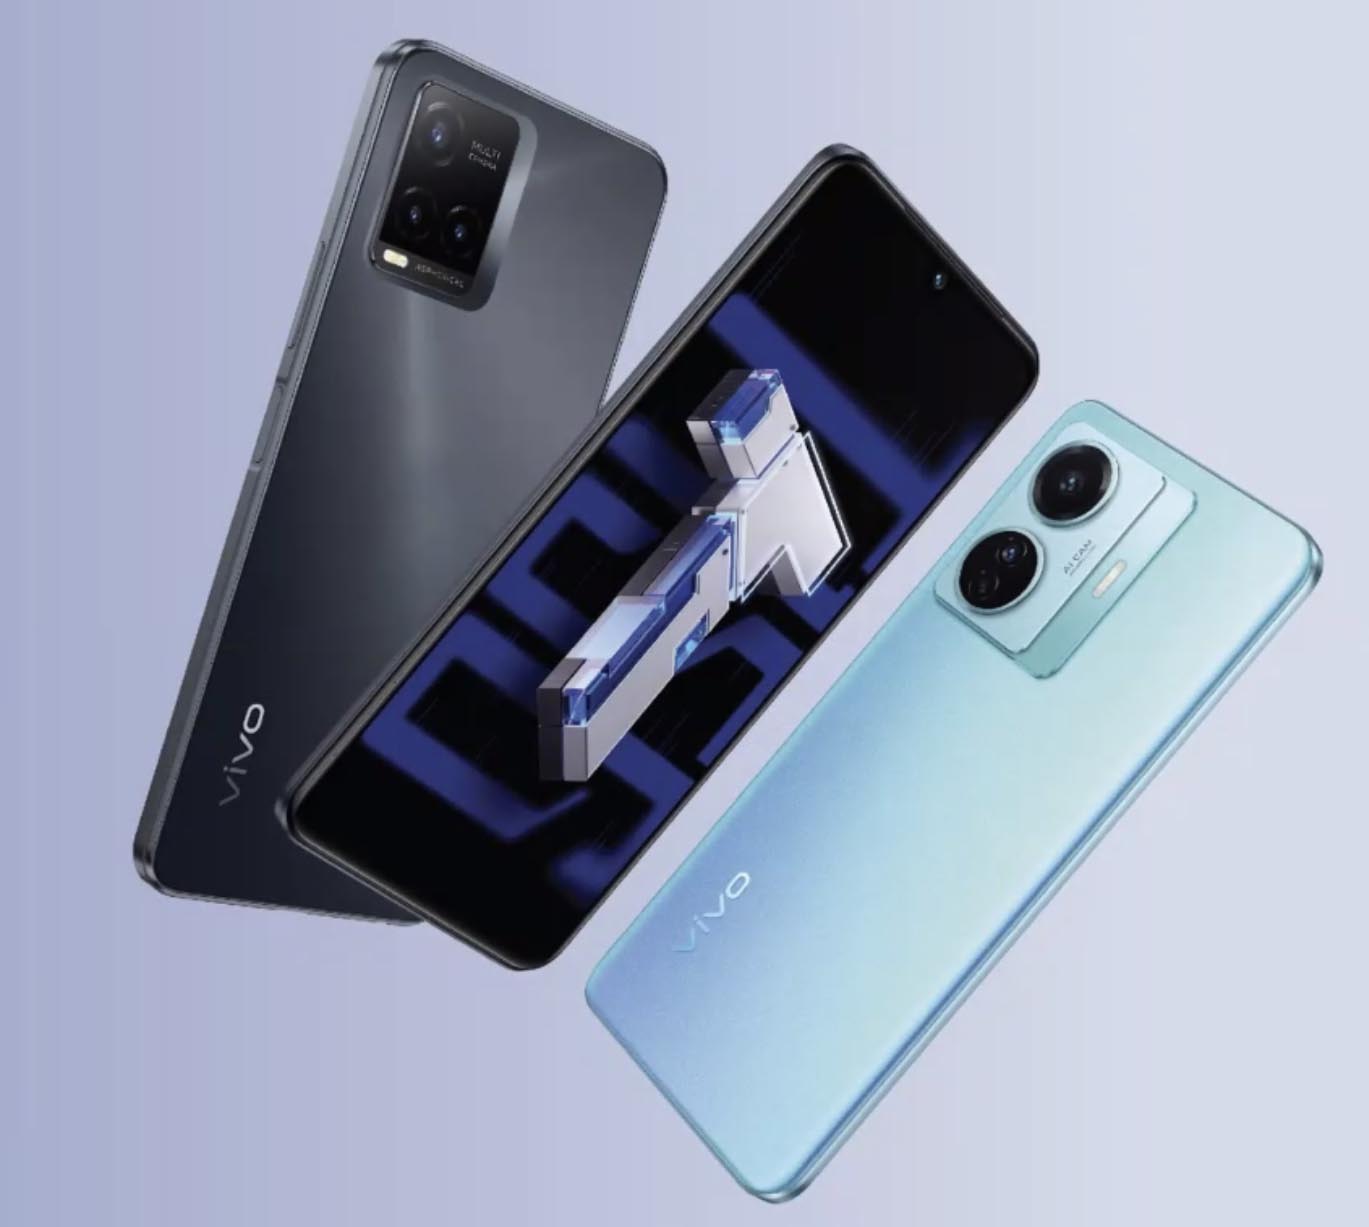 vivo T1 5G and vivo T1x unveiled, pre-order starts from May 27 – 29 and get awesome freebies!